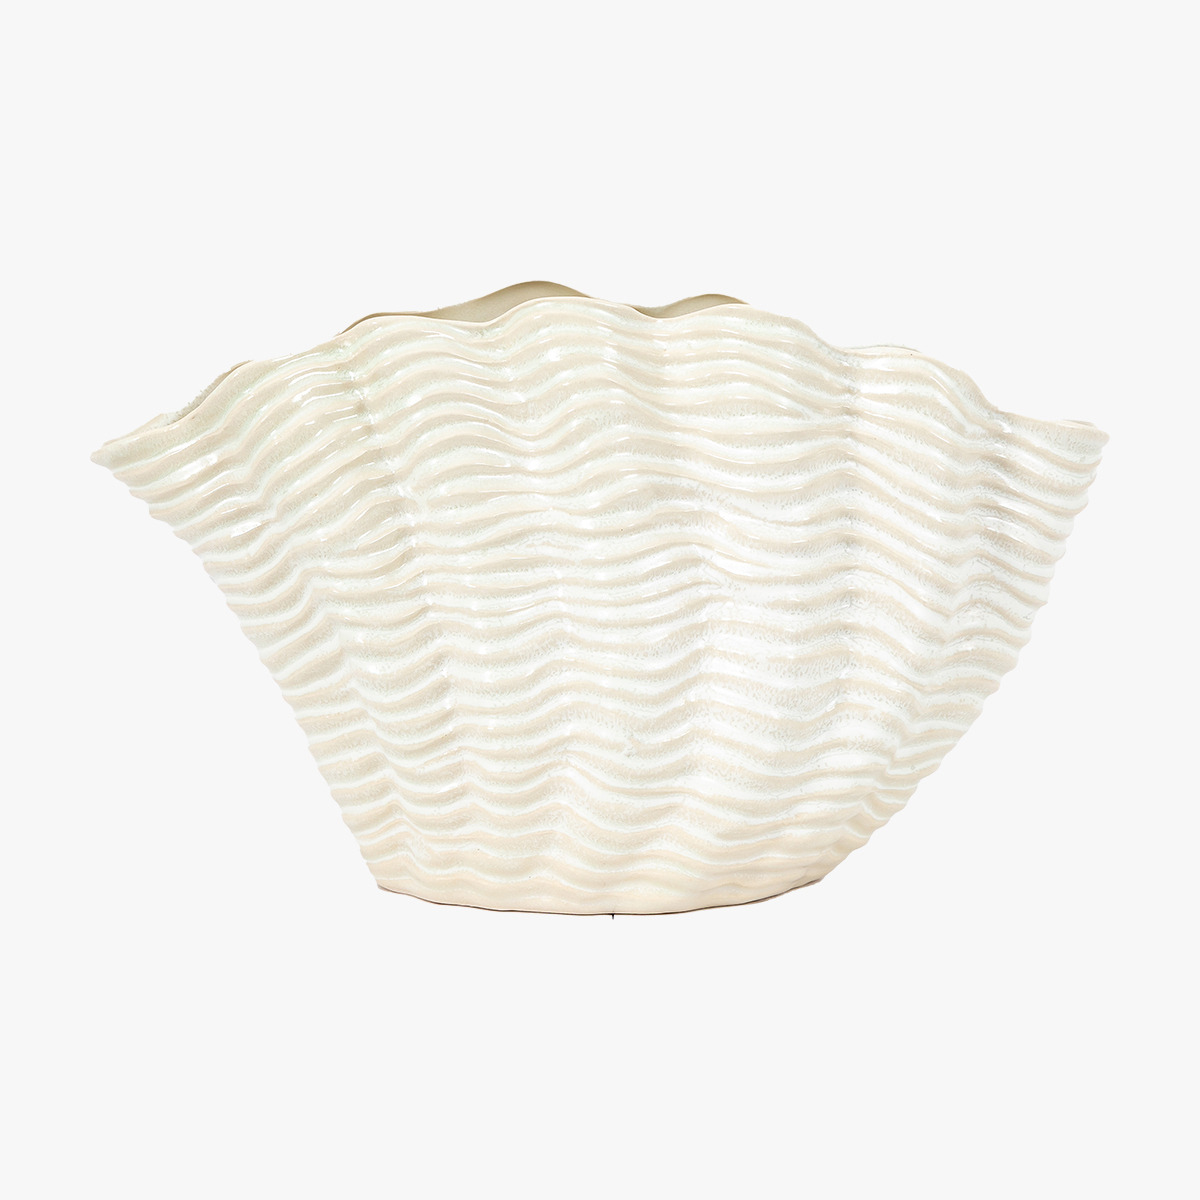 Cockle Shell Vase in White - Large